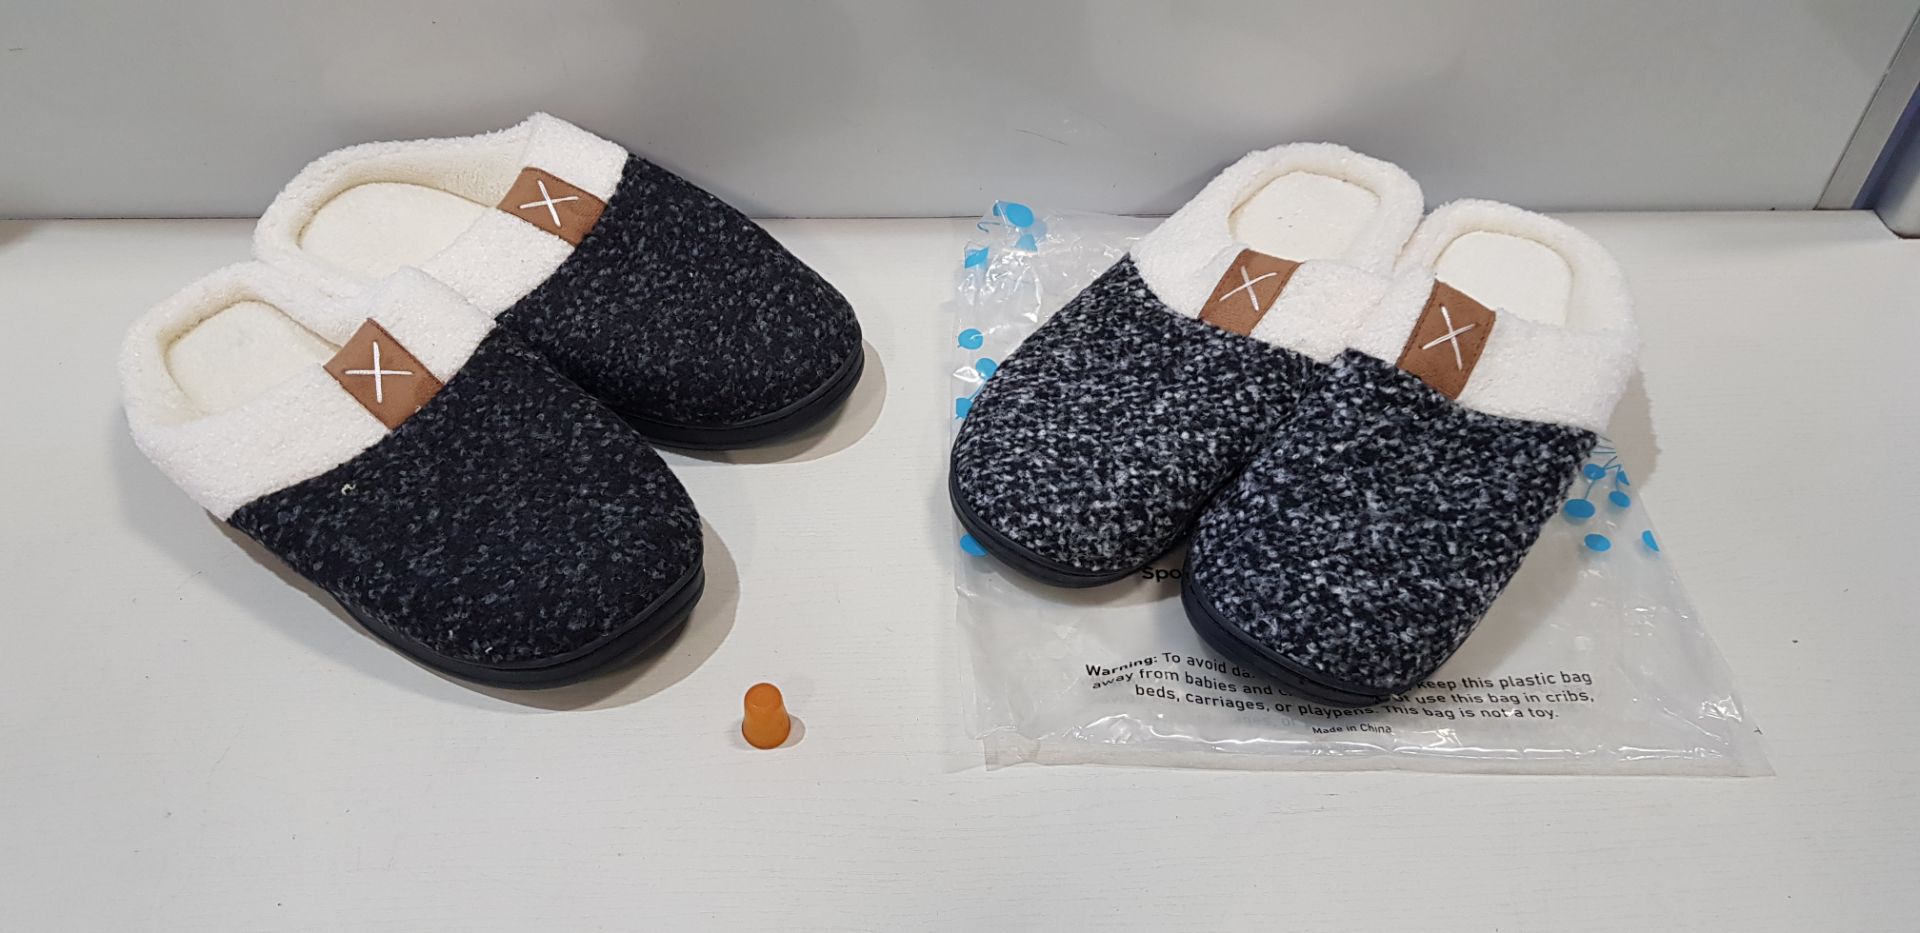 8 X BRAND NEW AGAINCARE MENS FLUFFY SLIPPERS - ALL IN BLACK AND BLACK AND WHITE - IN SIZES UK 7- 8 /